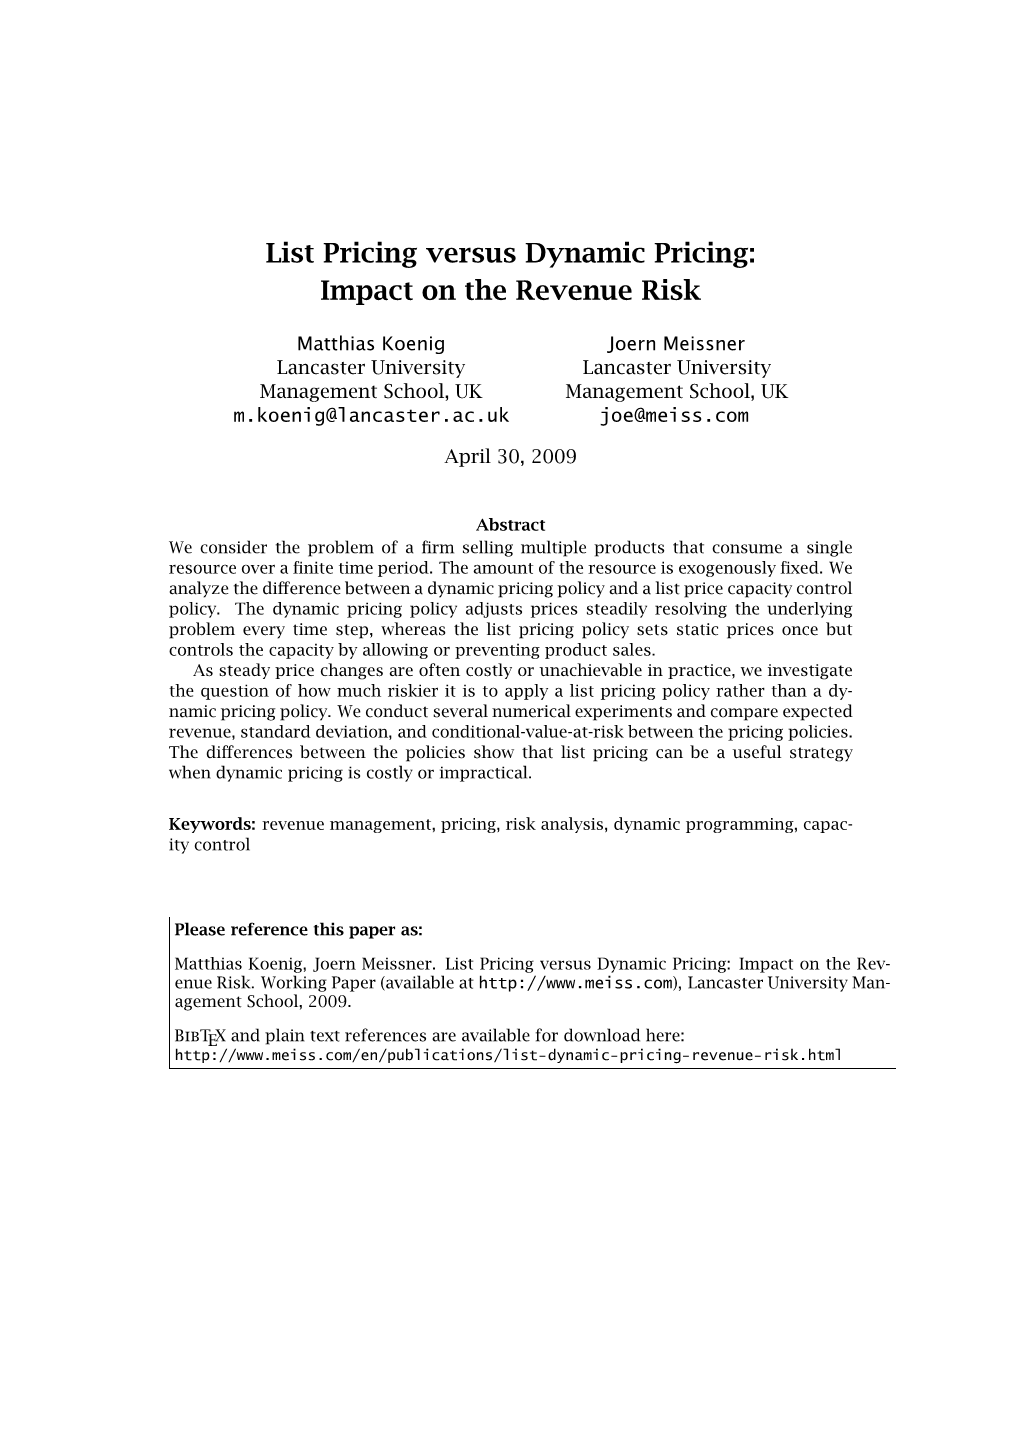 List Pricing Versus Dynamic Pricing: Impact on the Revenue Risk